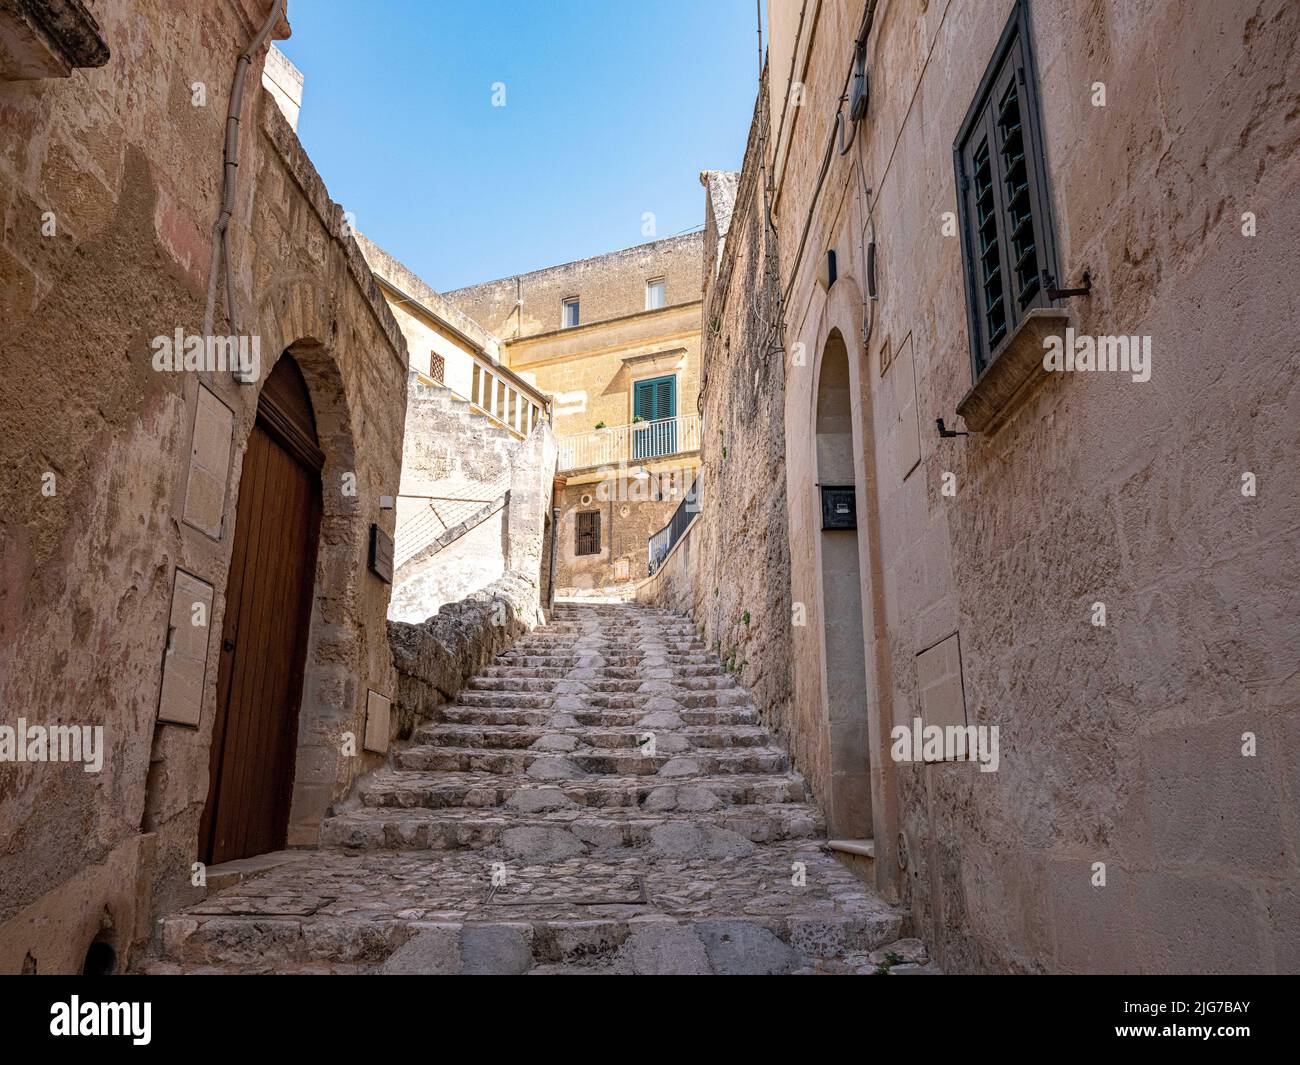 Street scene in the Sassi neighborhood of Matera, Italy with limestone houses and cave-like dwellings throughout & dating from Paleolithic times Stock Photo